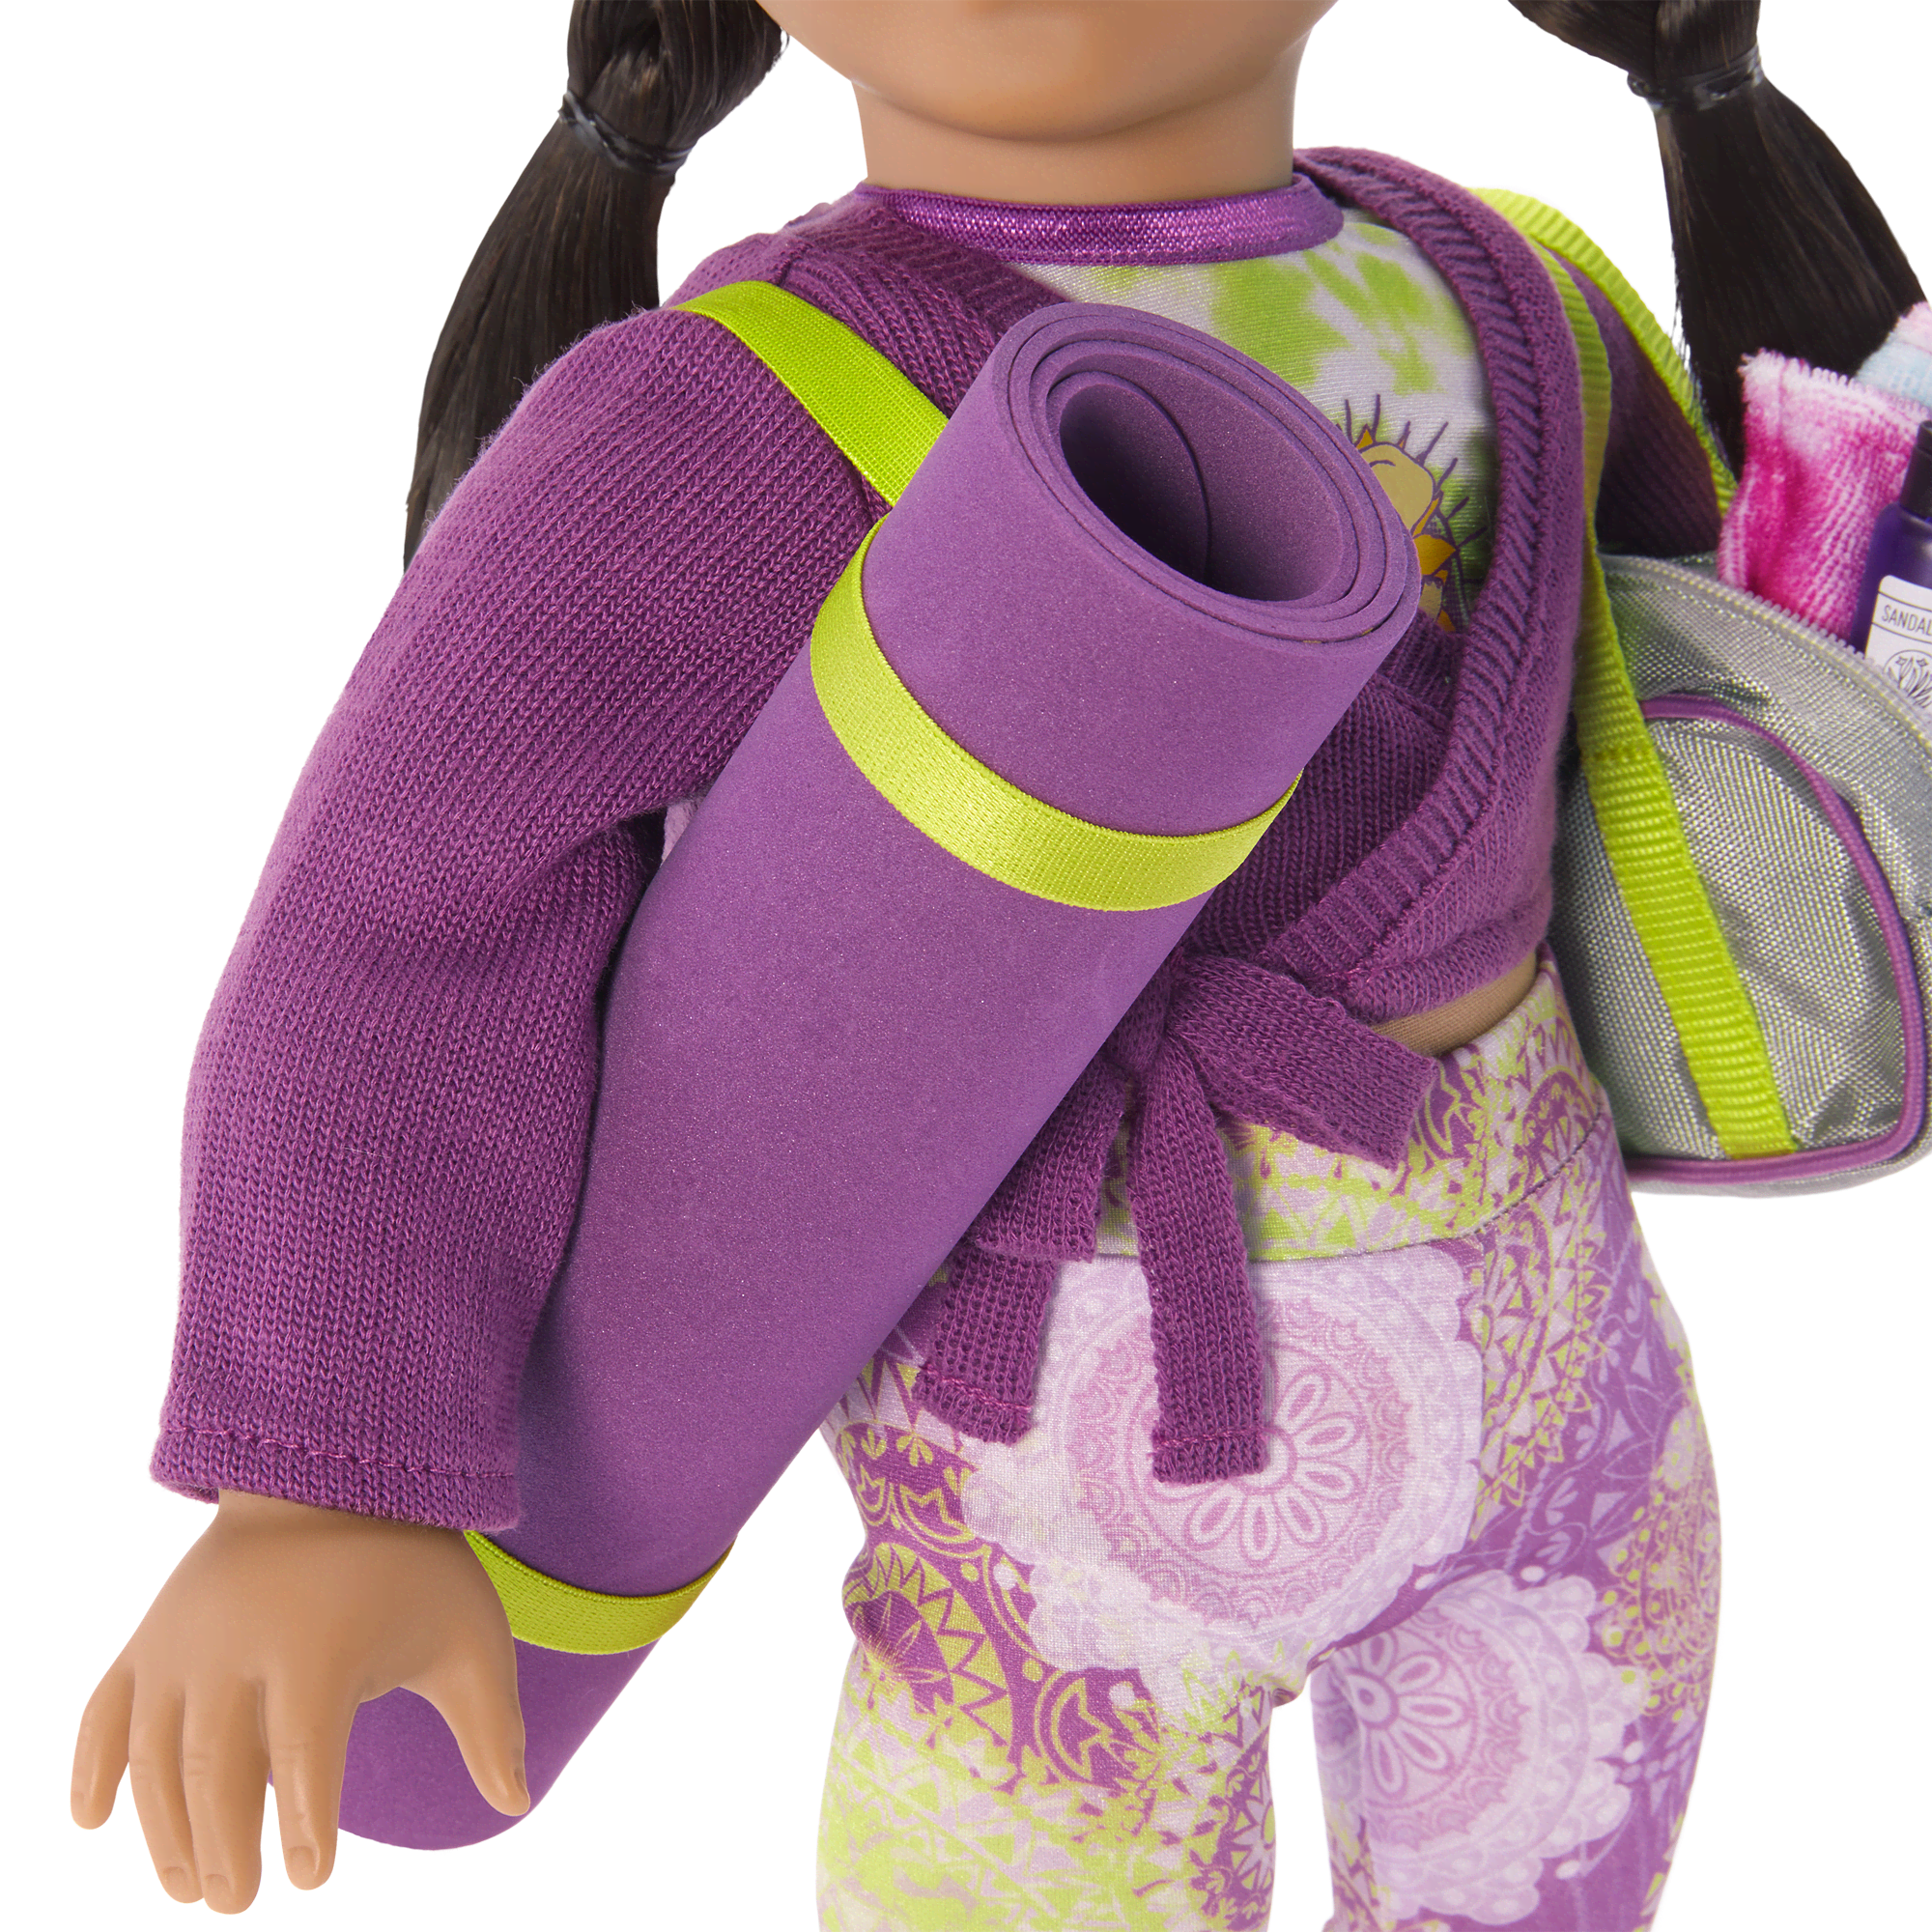 Kavi's™ Yoga Accessories for 18-inch Dolls (Girl of the Year™ 2023)